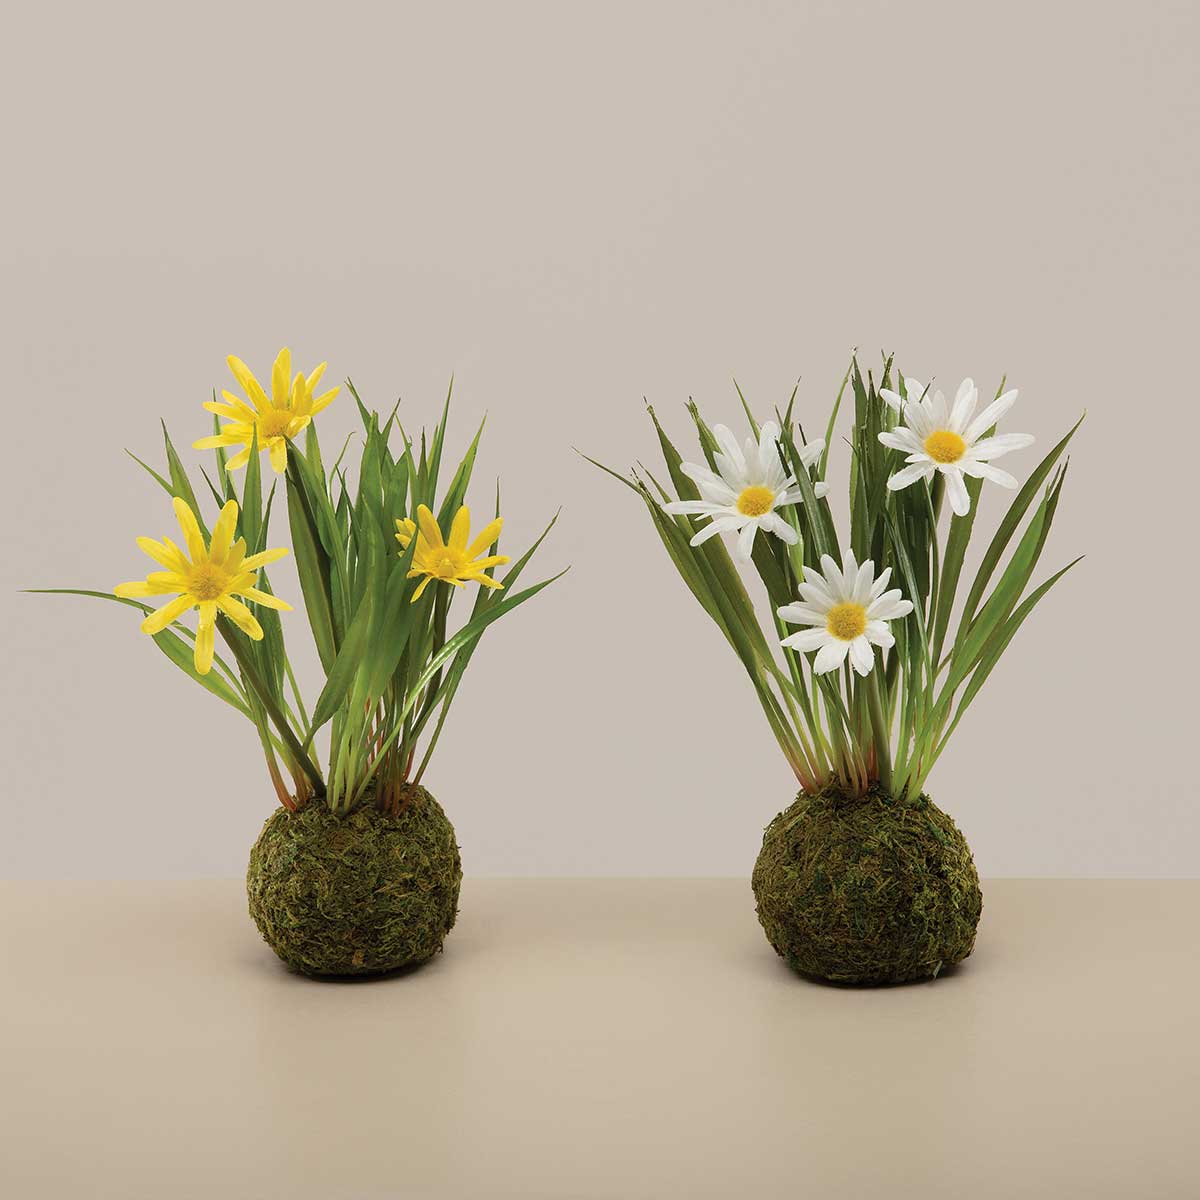 MINI DAISY ON MOSS BALL YELLOW 5IN X 8IN POLYESTER/PLASTIC - Click Image to Close